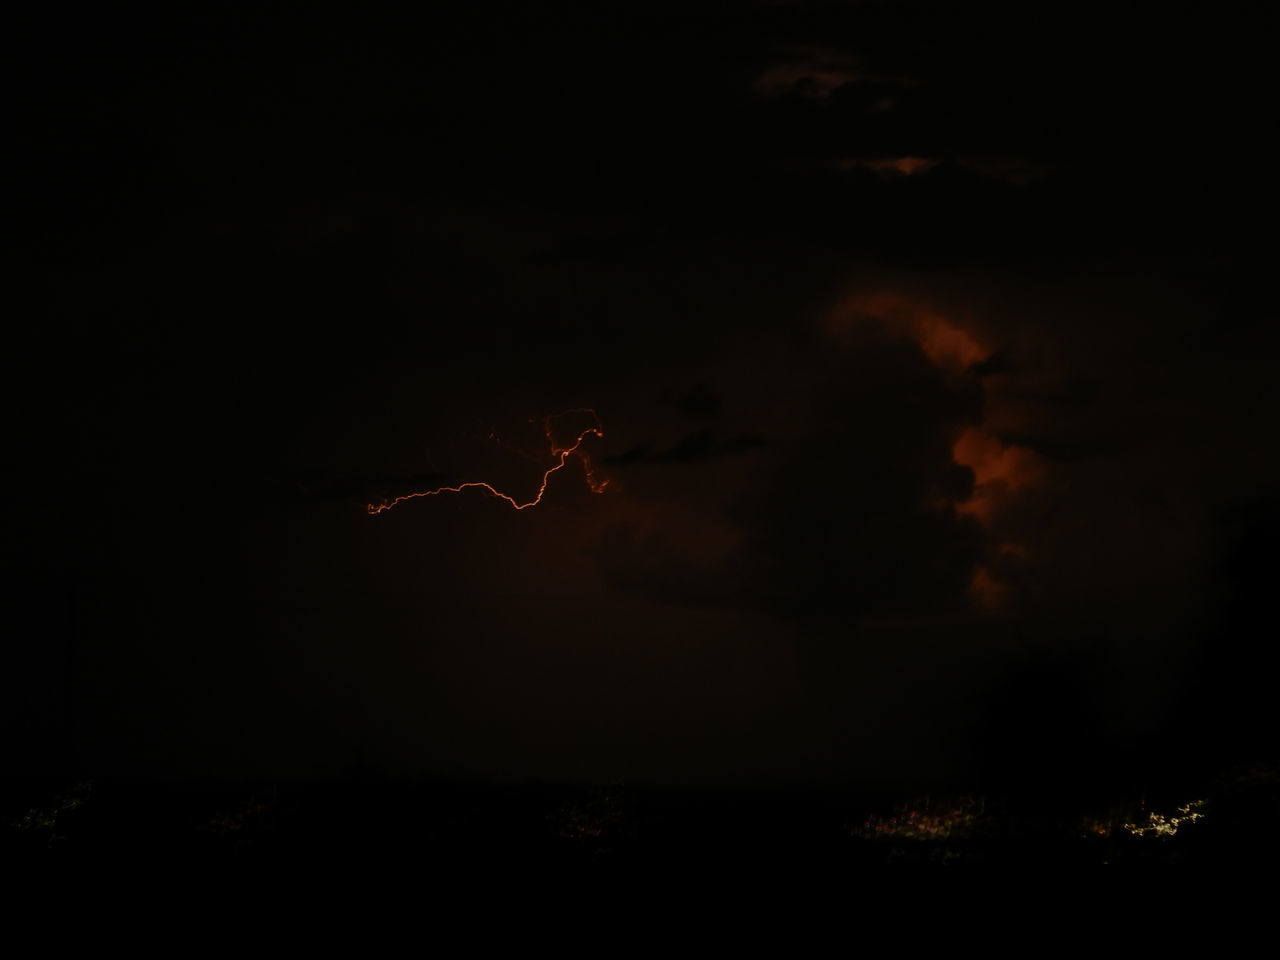 darkness, night, lightning, sky, cloud, no people, beauty in nature, nature, thunder, light, illuminated, power in nature, outdoors, dark, copy space, motion, smoke